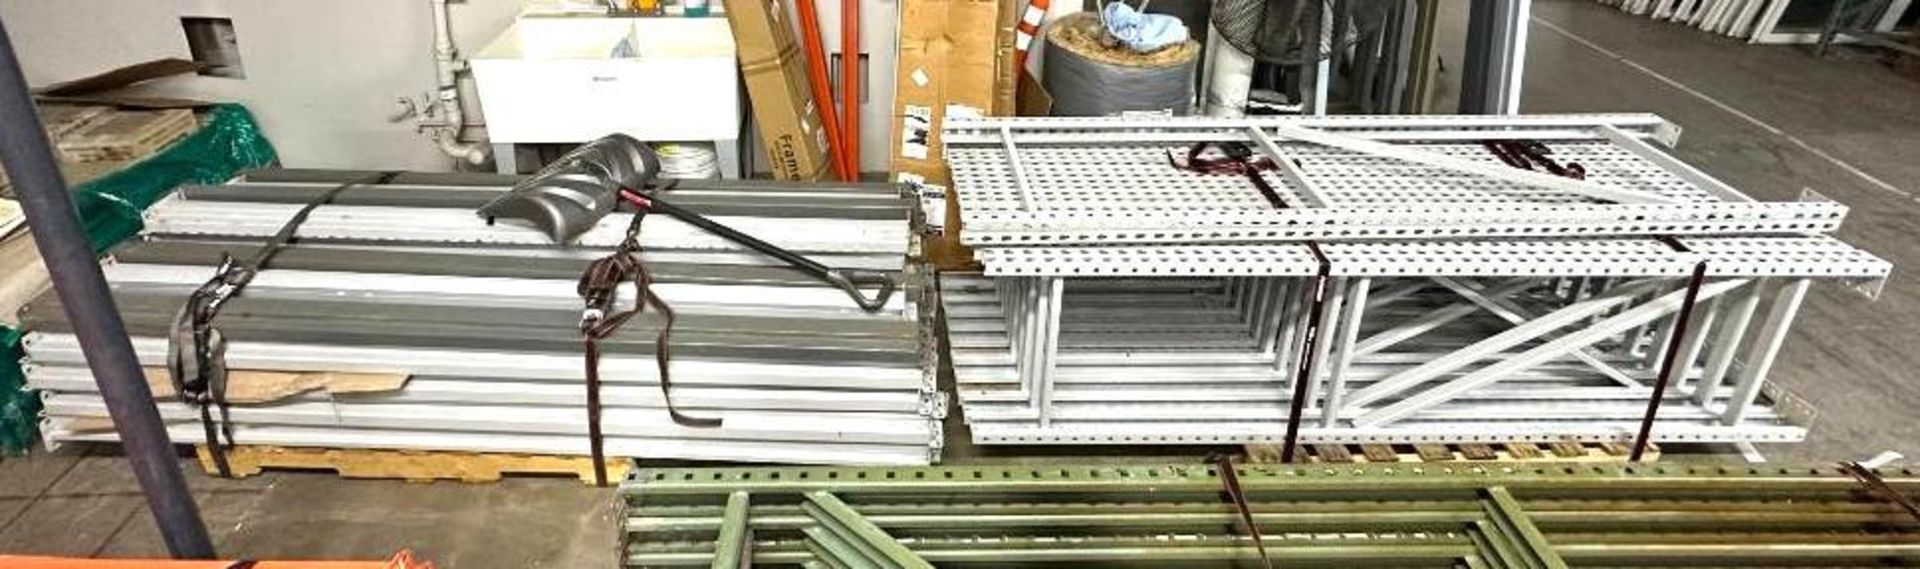 (10) SECTIONS OF 96" X 96" TEAR DROP STYLE PALLET RACKING INFORMATION: INCLUDES: (8) 24" X 96" UPRIG